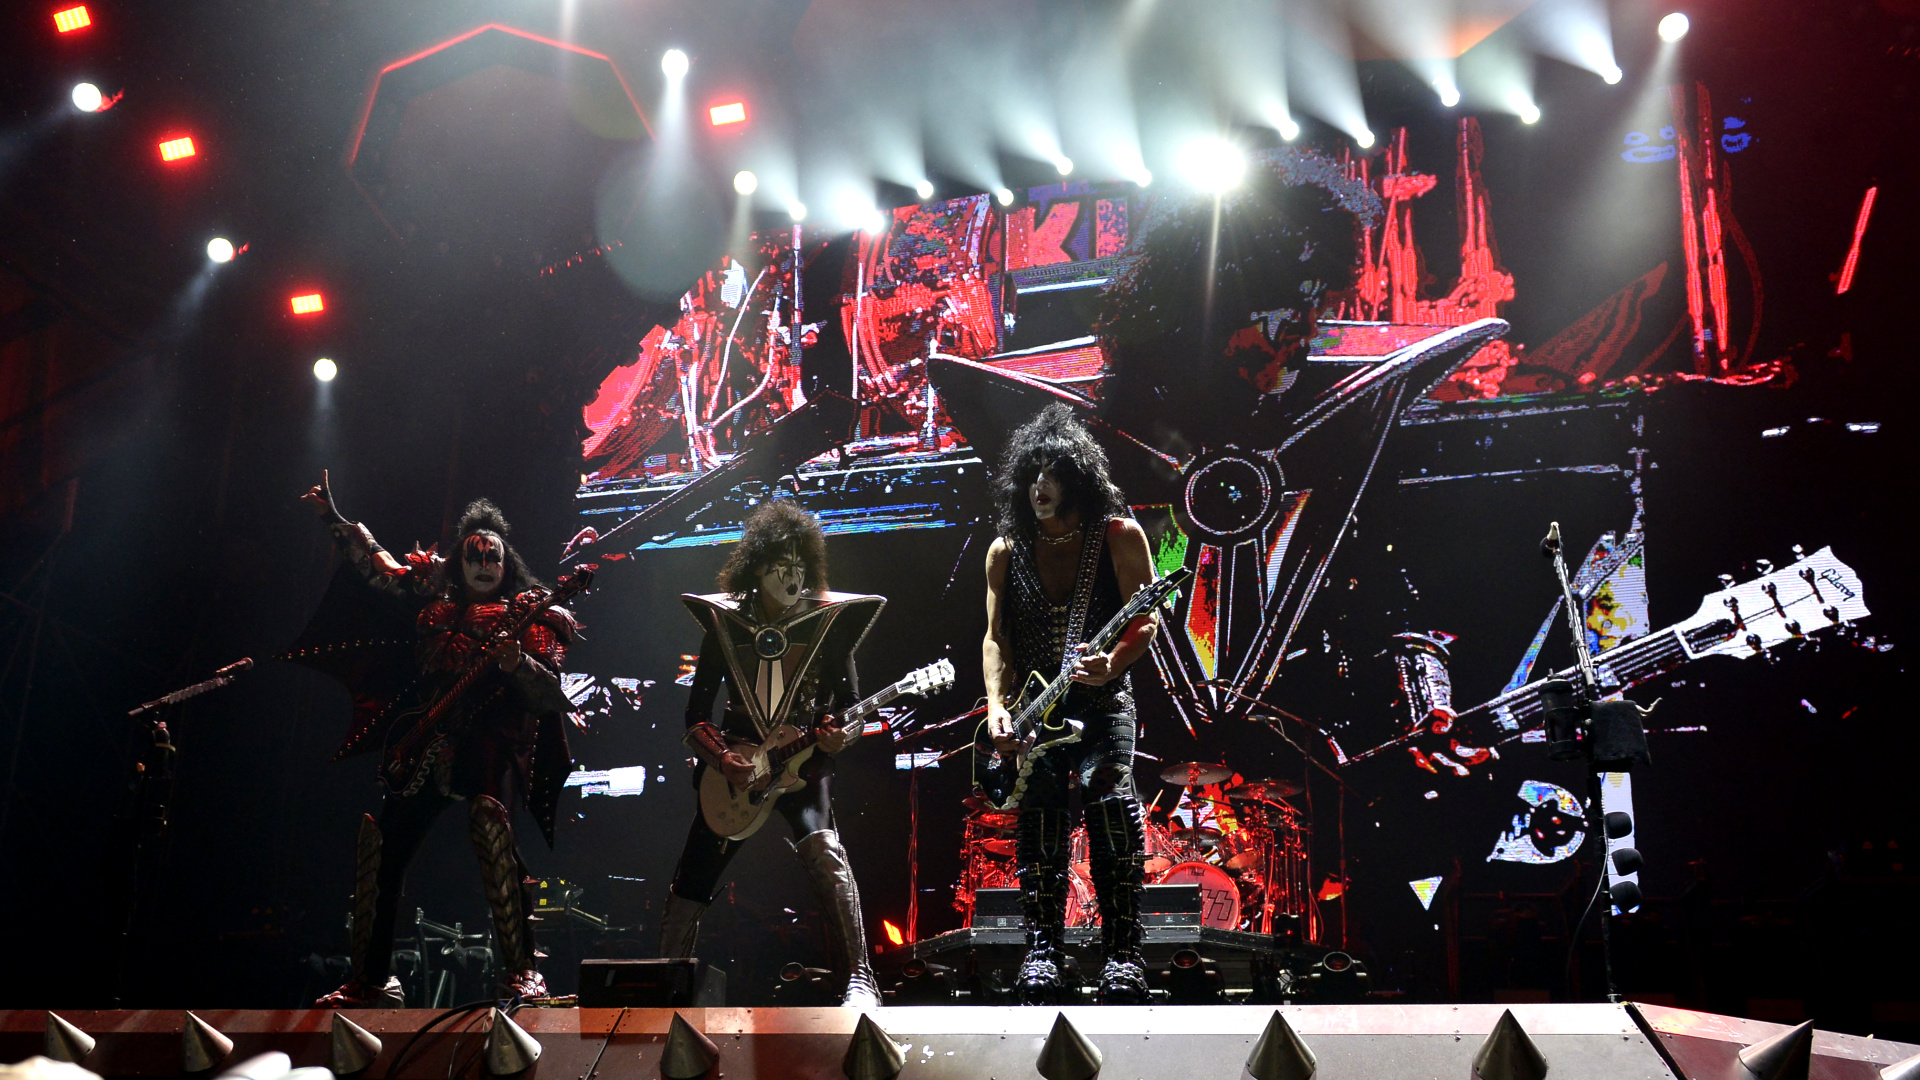 Gene Simmons, Tommy Thayer and Paul Stanley in action